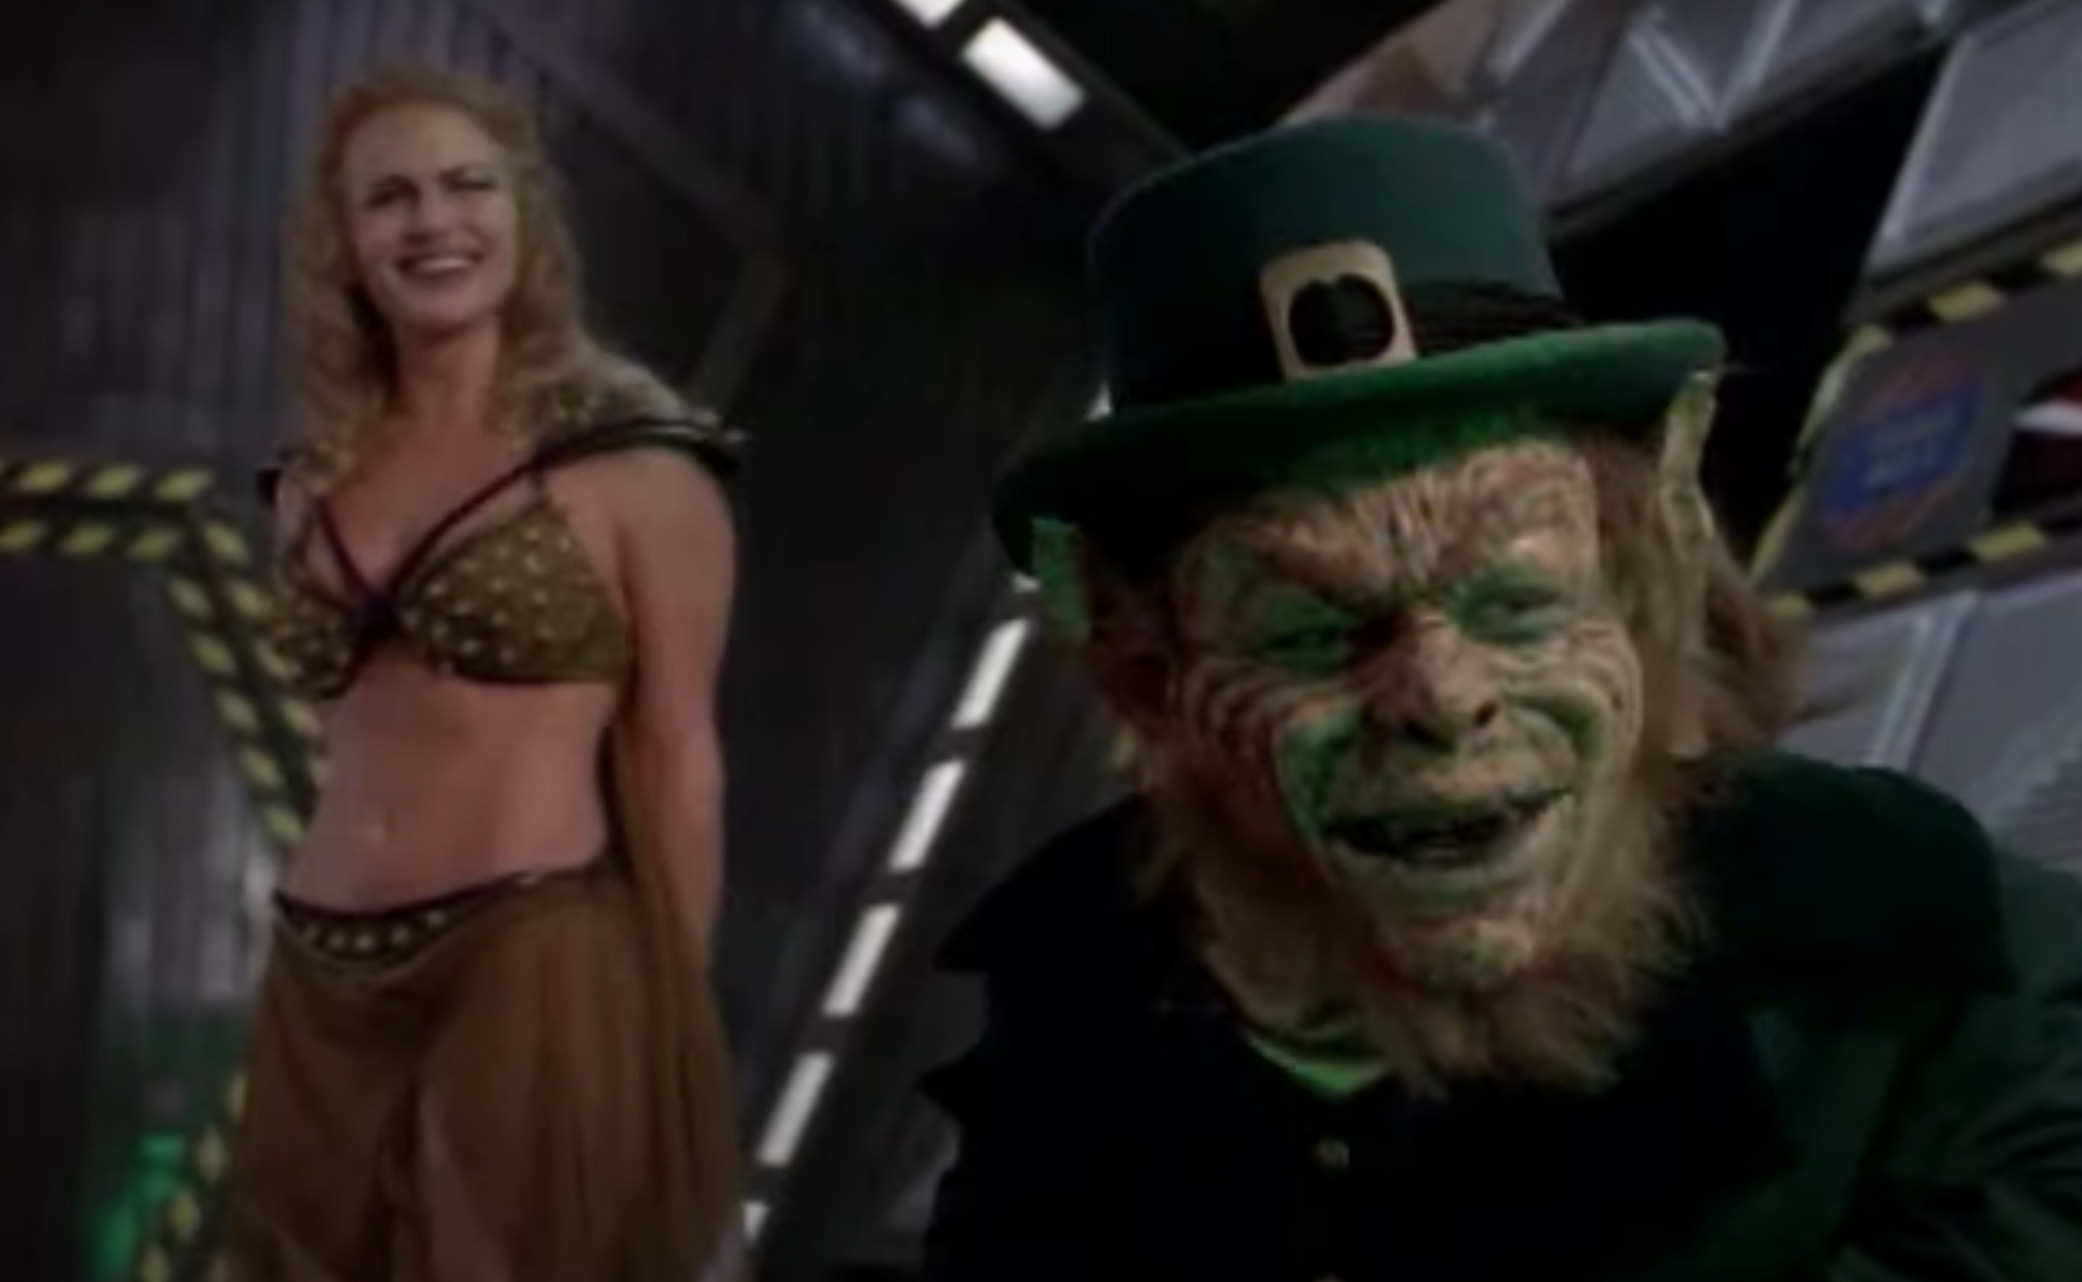 There he is! That's Leprechaun!